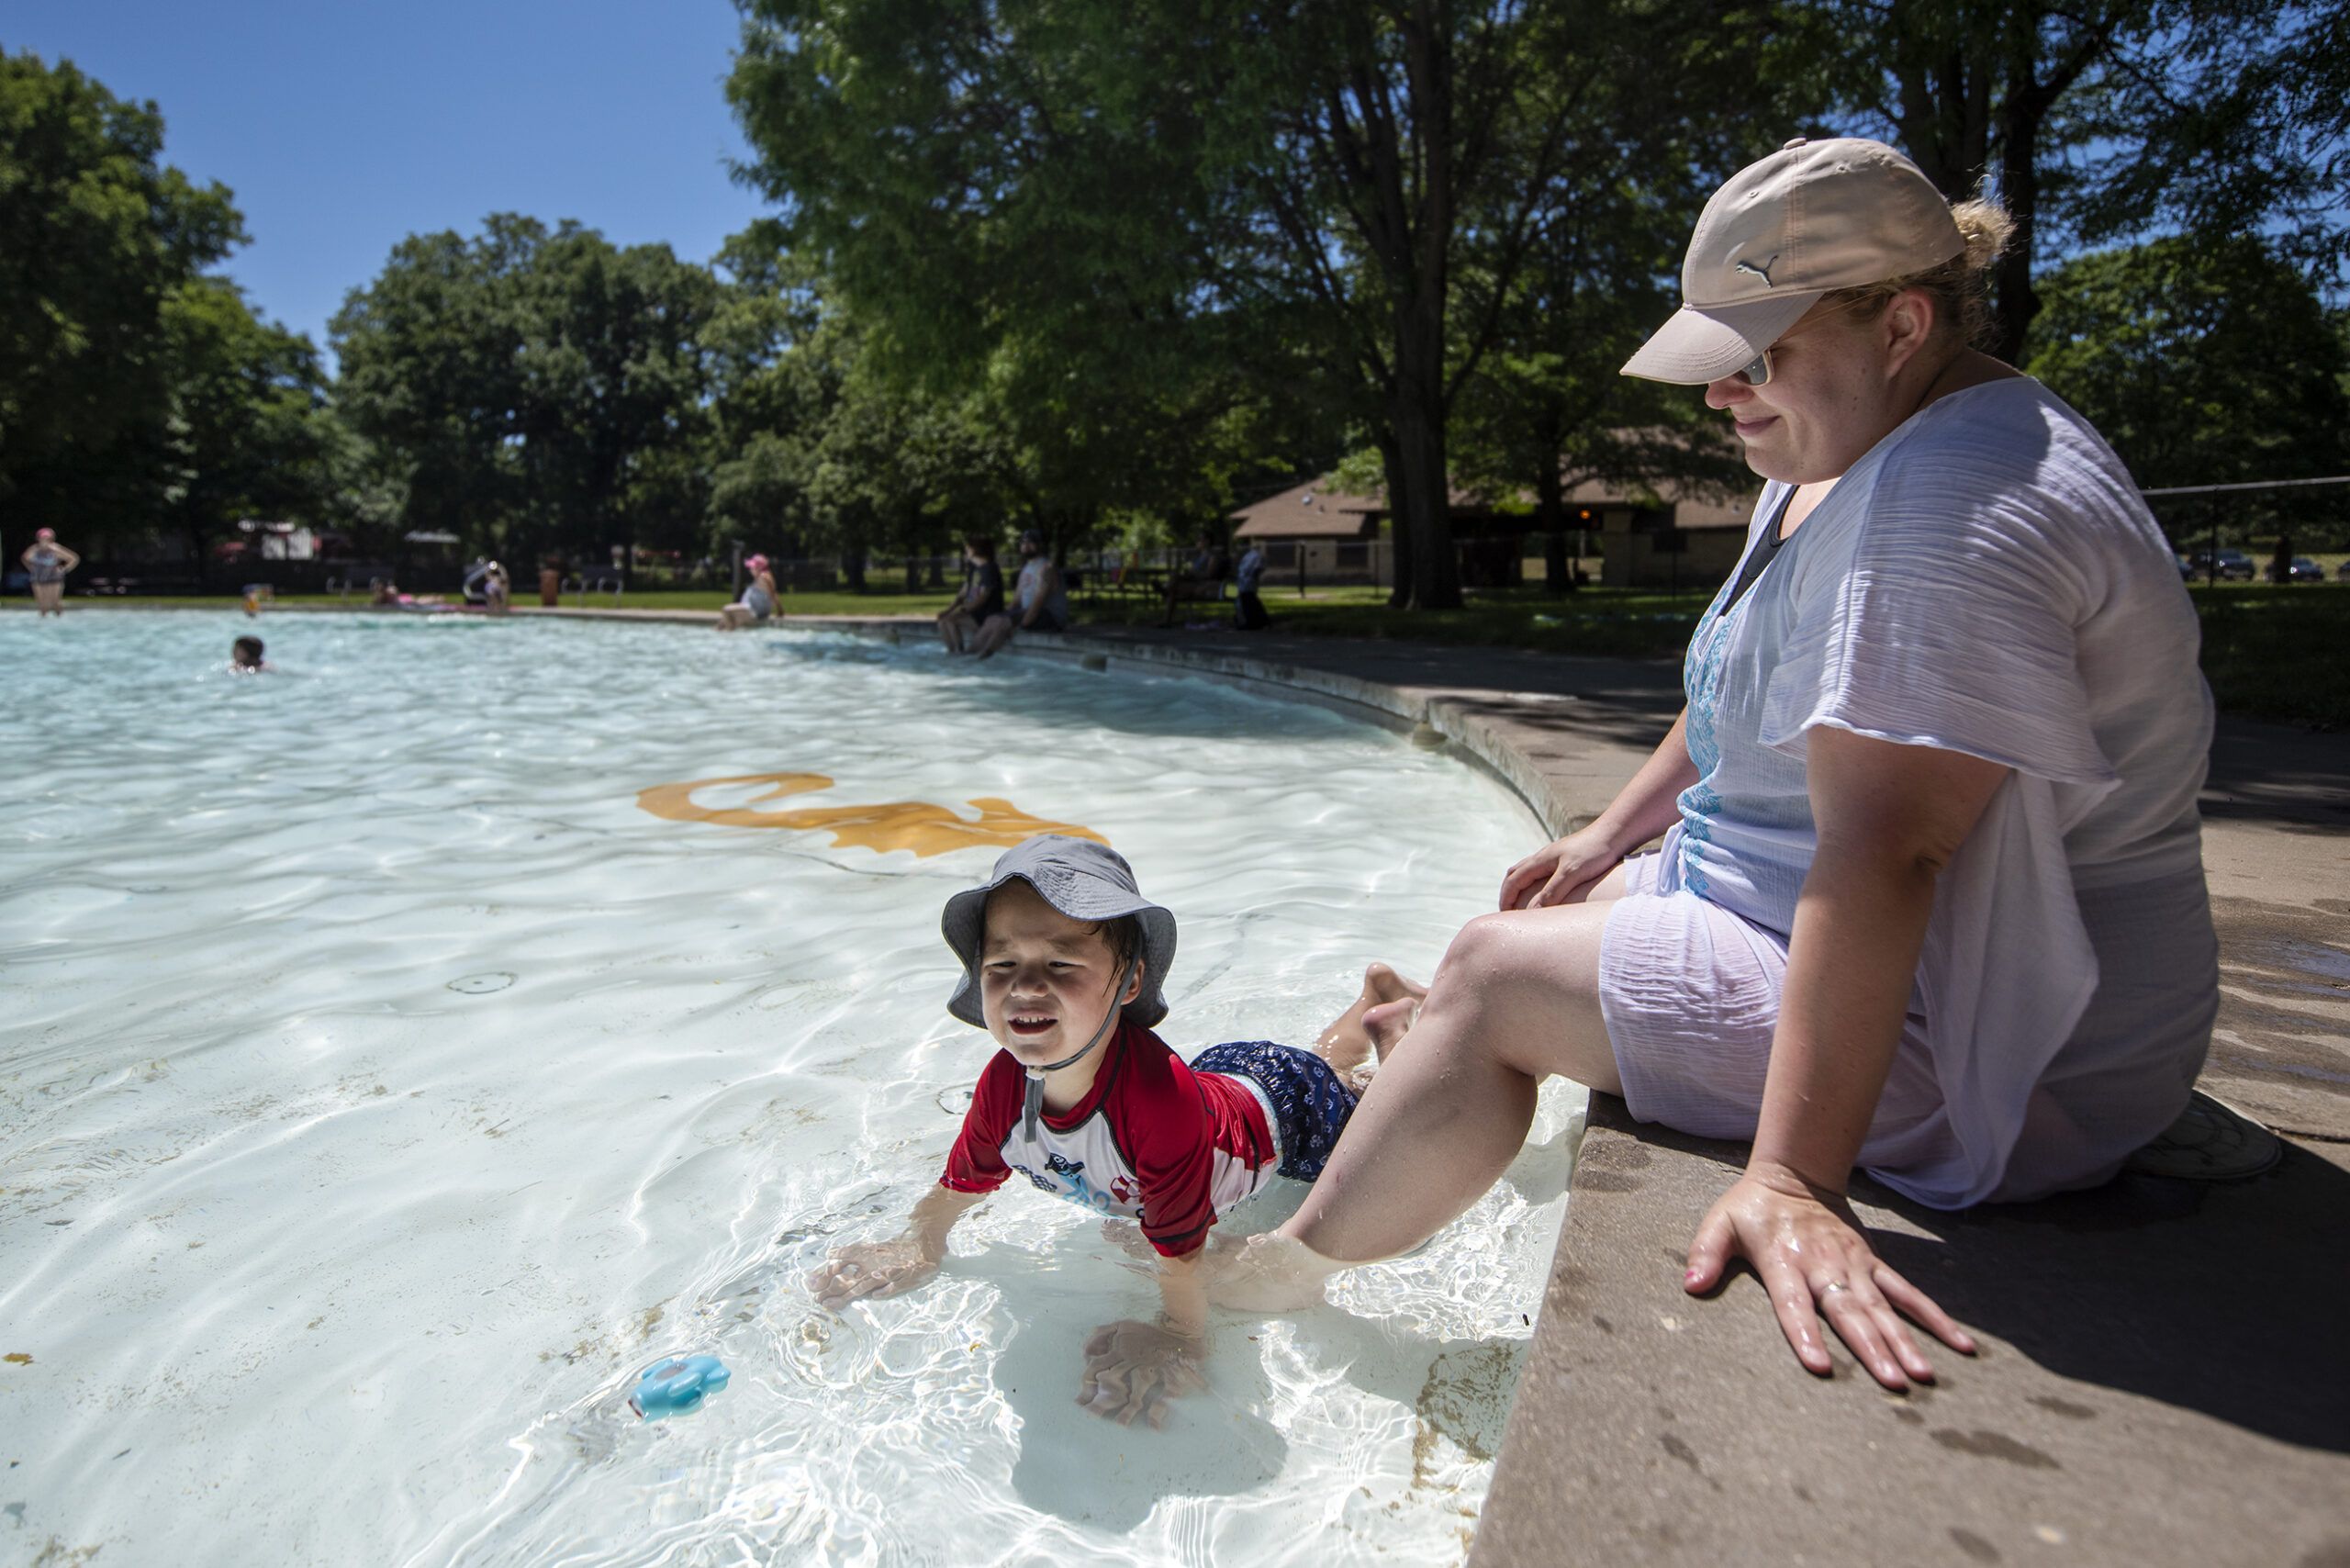 Extreme heat and humidity is hitting Wisconsin. But climate experts say it’s nothing unusual for summer.